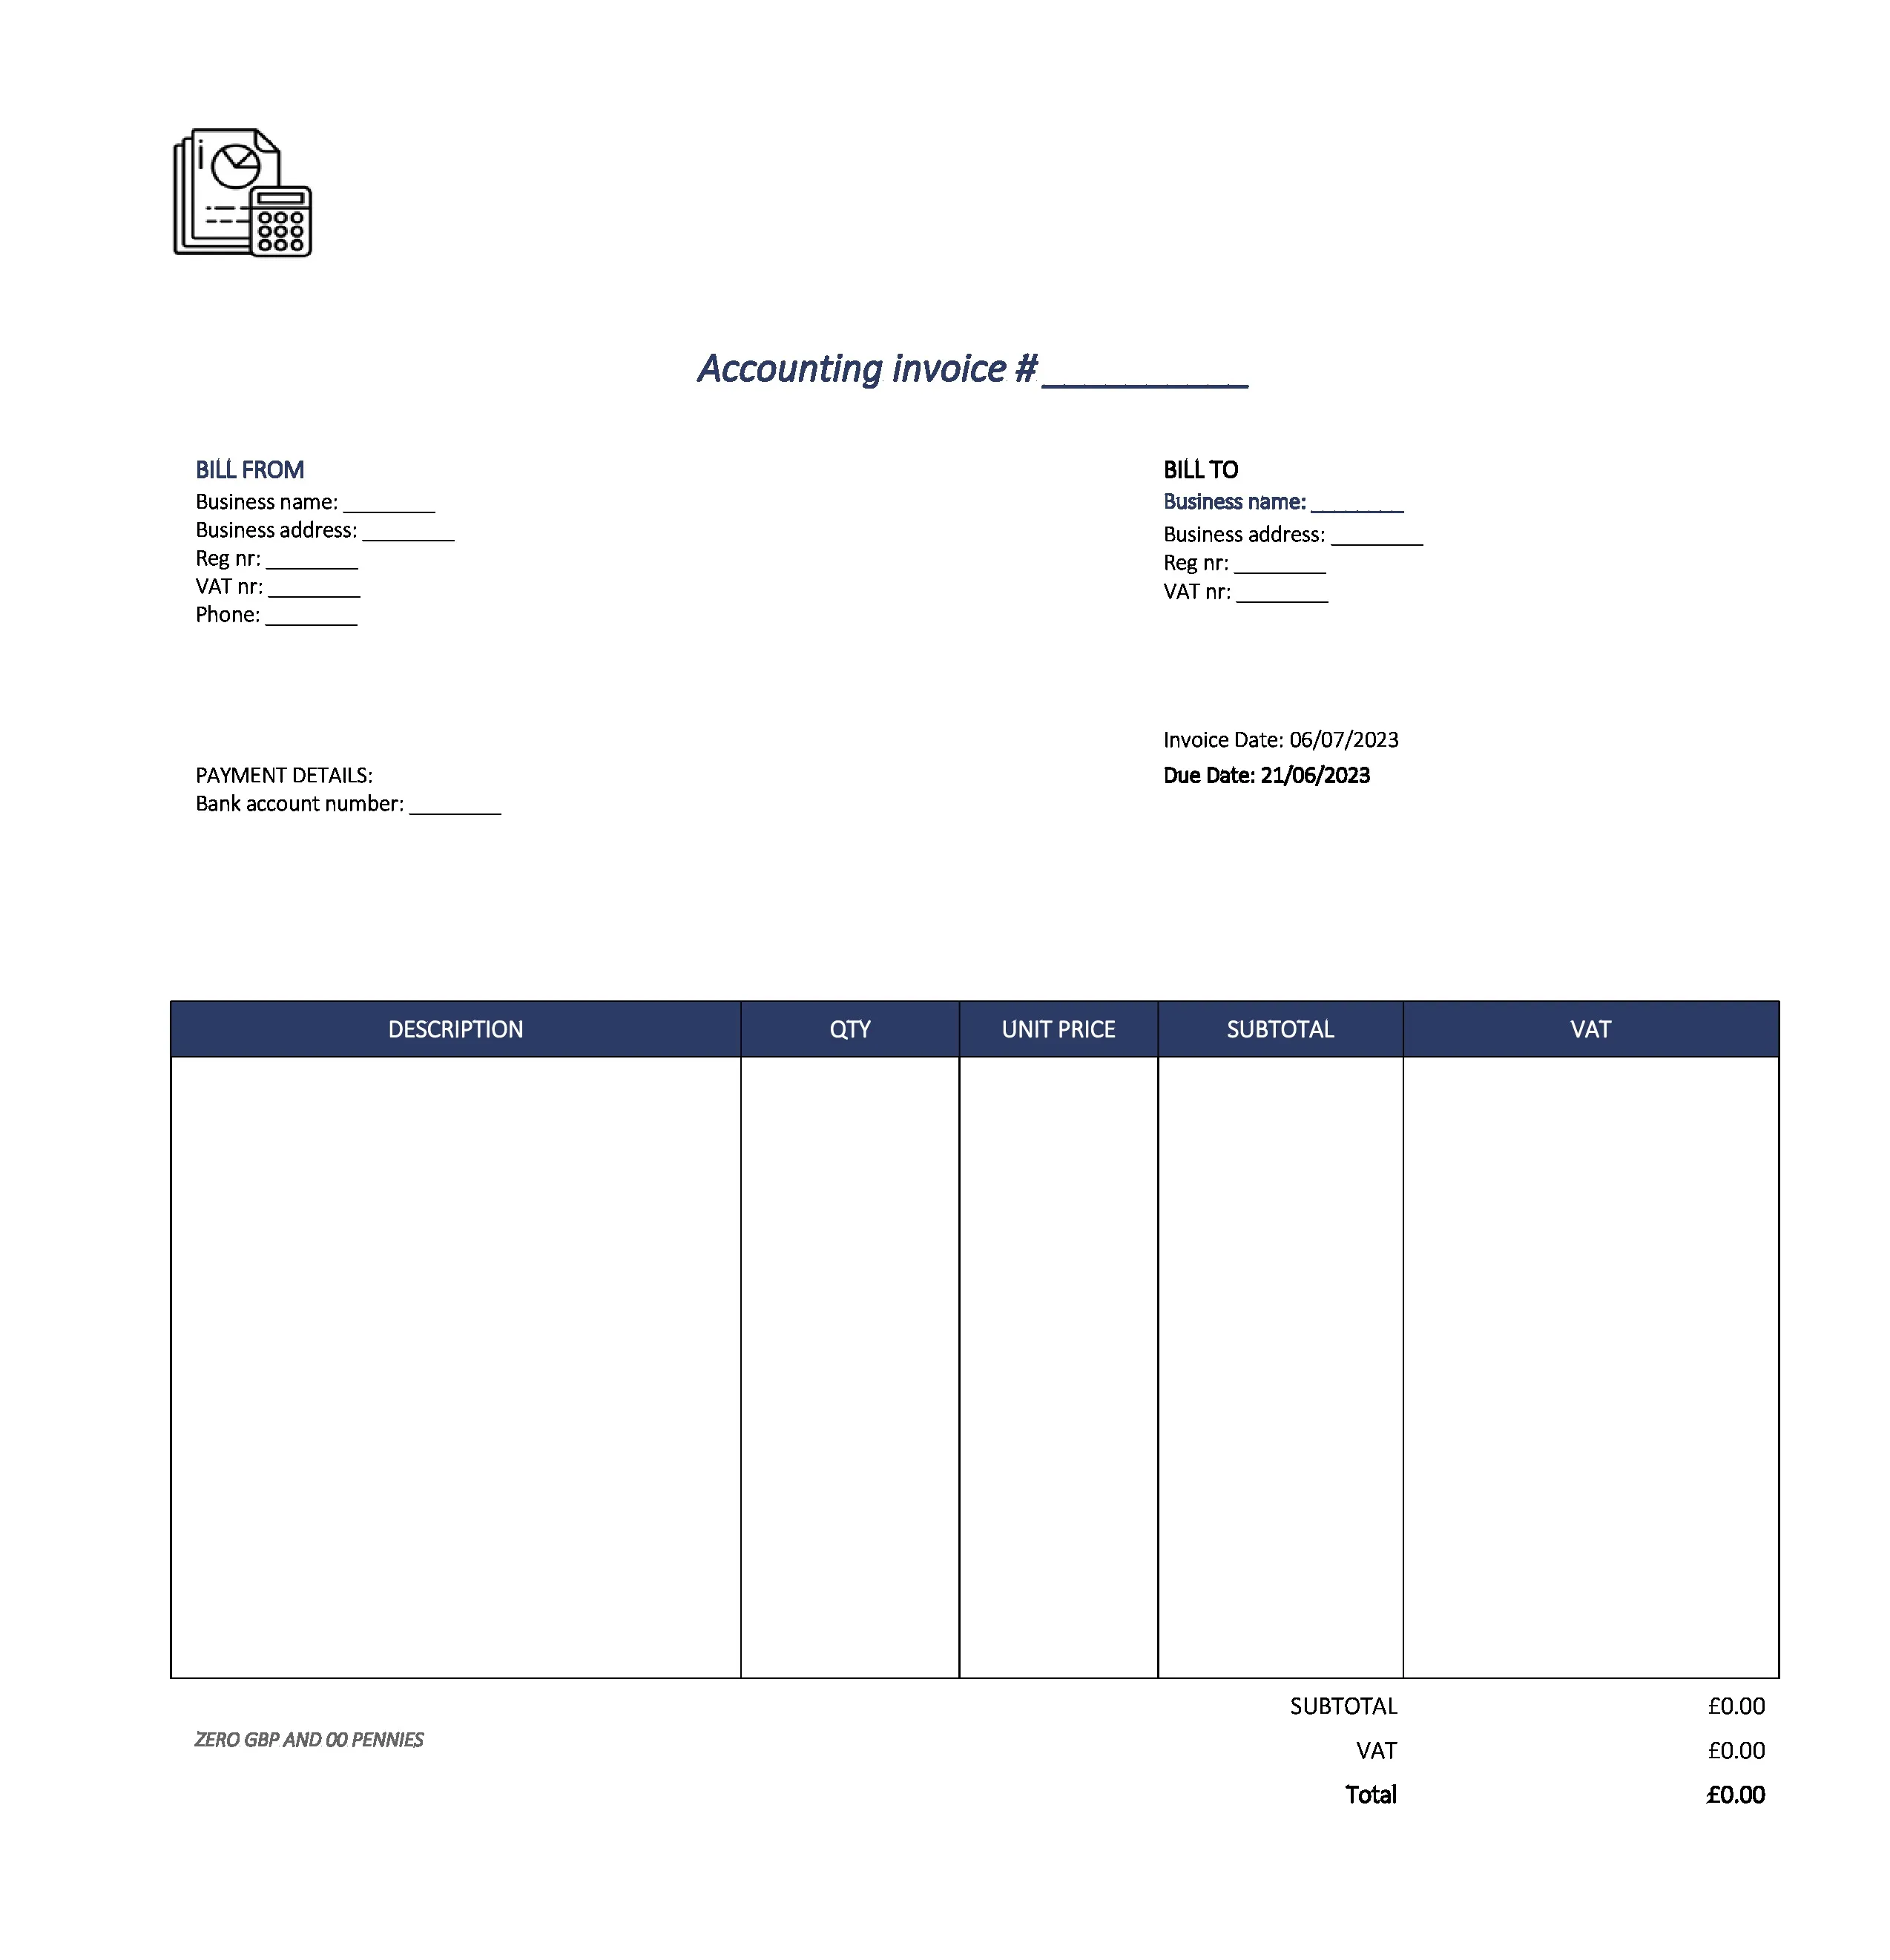 detailed accounting invoice template UK Excel / Google sheets